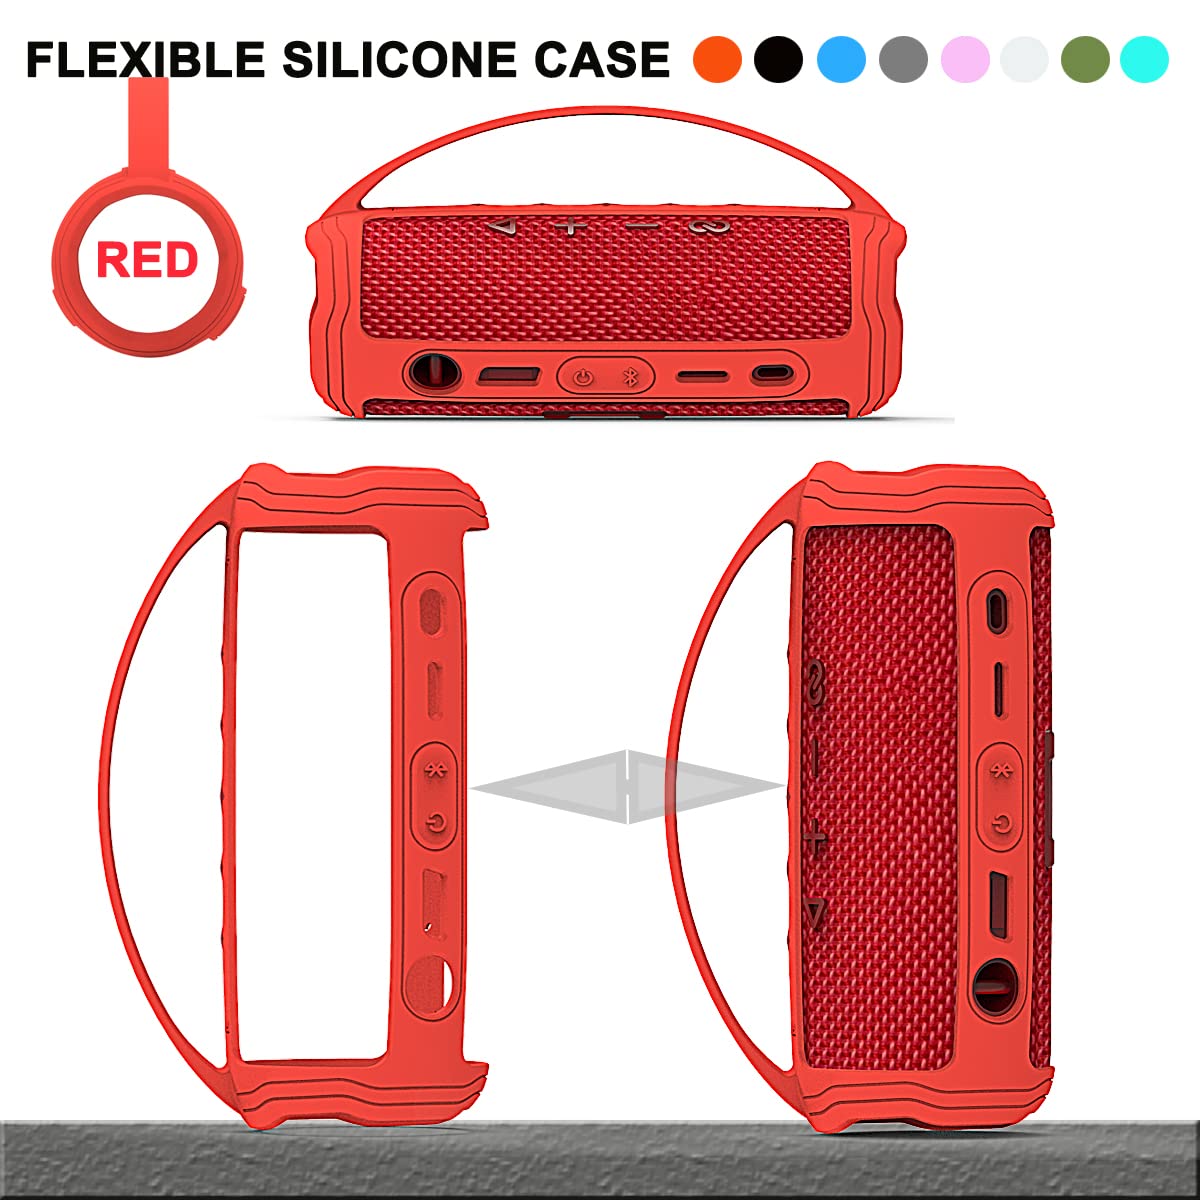 Silicone Cover Case for JBL Flip 6 Portable Bluetooth Speaker, Protective Carrying Case for JBL Flip 6 Speaker Accessories (Only Case) (Red Case)